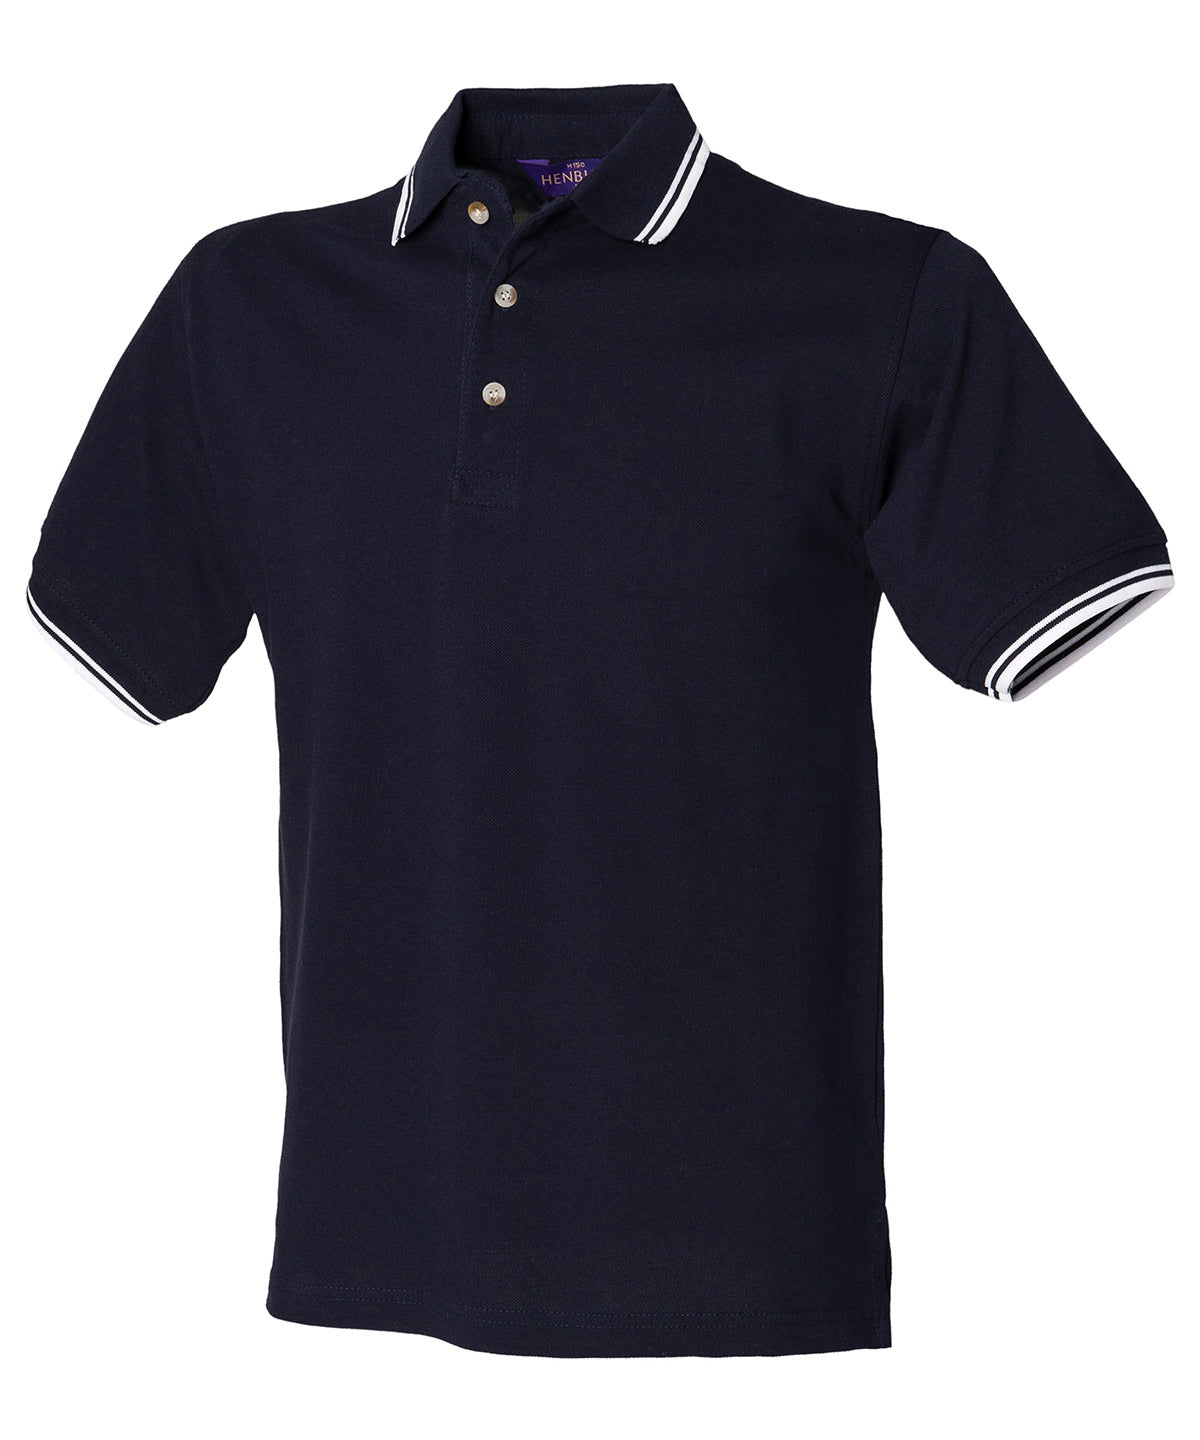 Personalised Polo Shirts - Black Henbury Double tipped collar and cuff polo shirt